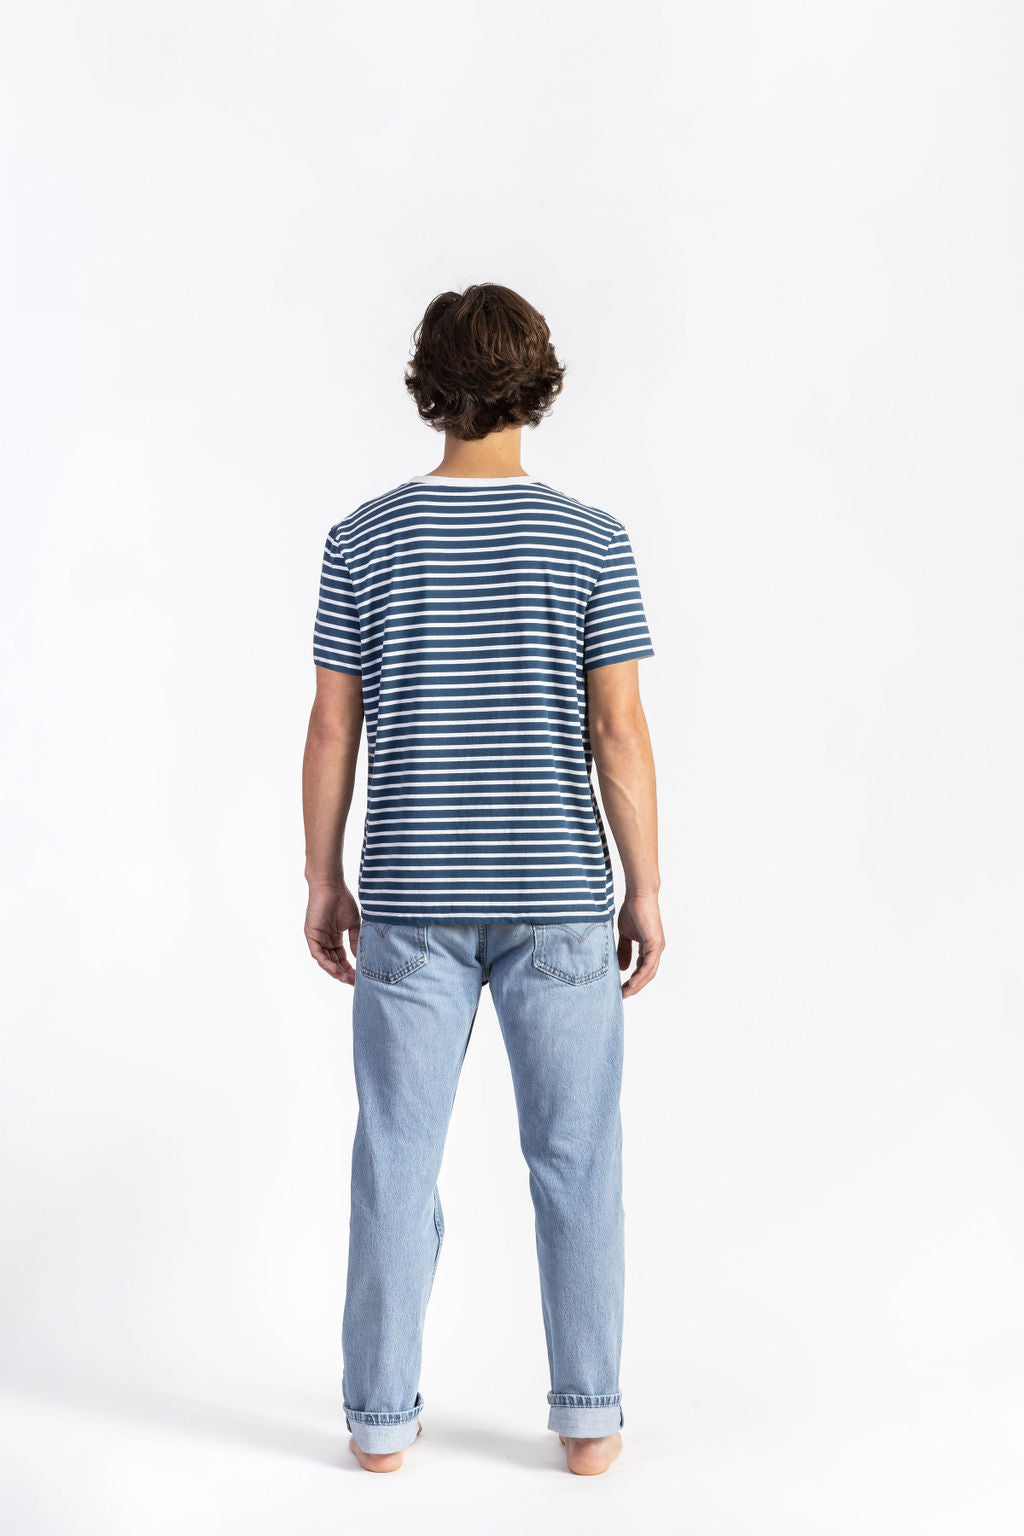 A man wearing a Blue/White Striped Tee Shirt with light blue jeans